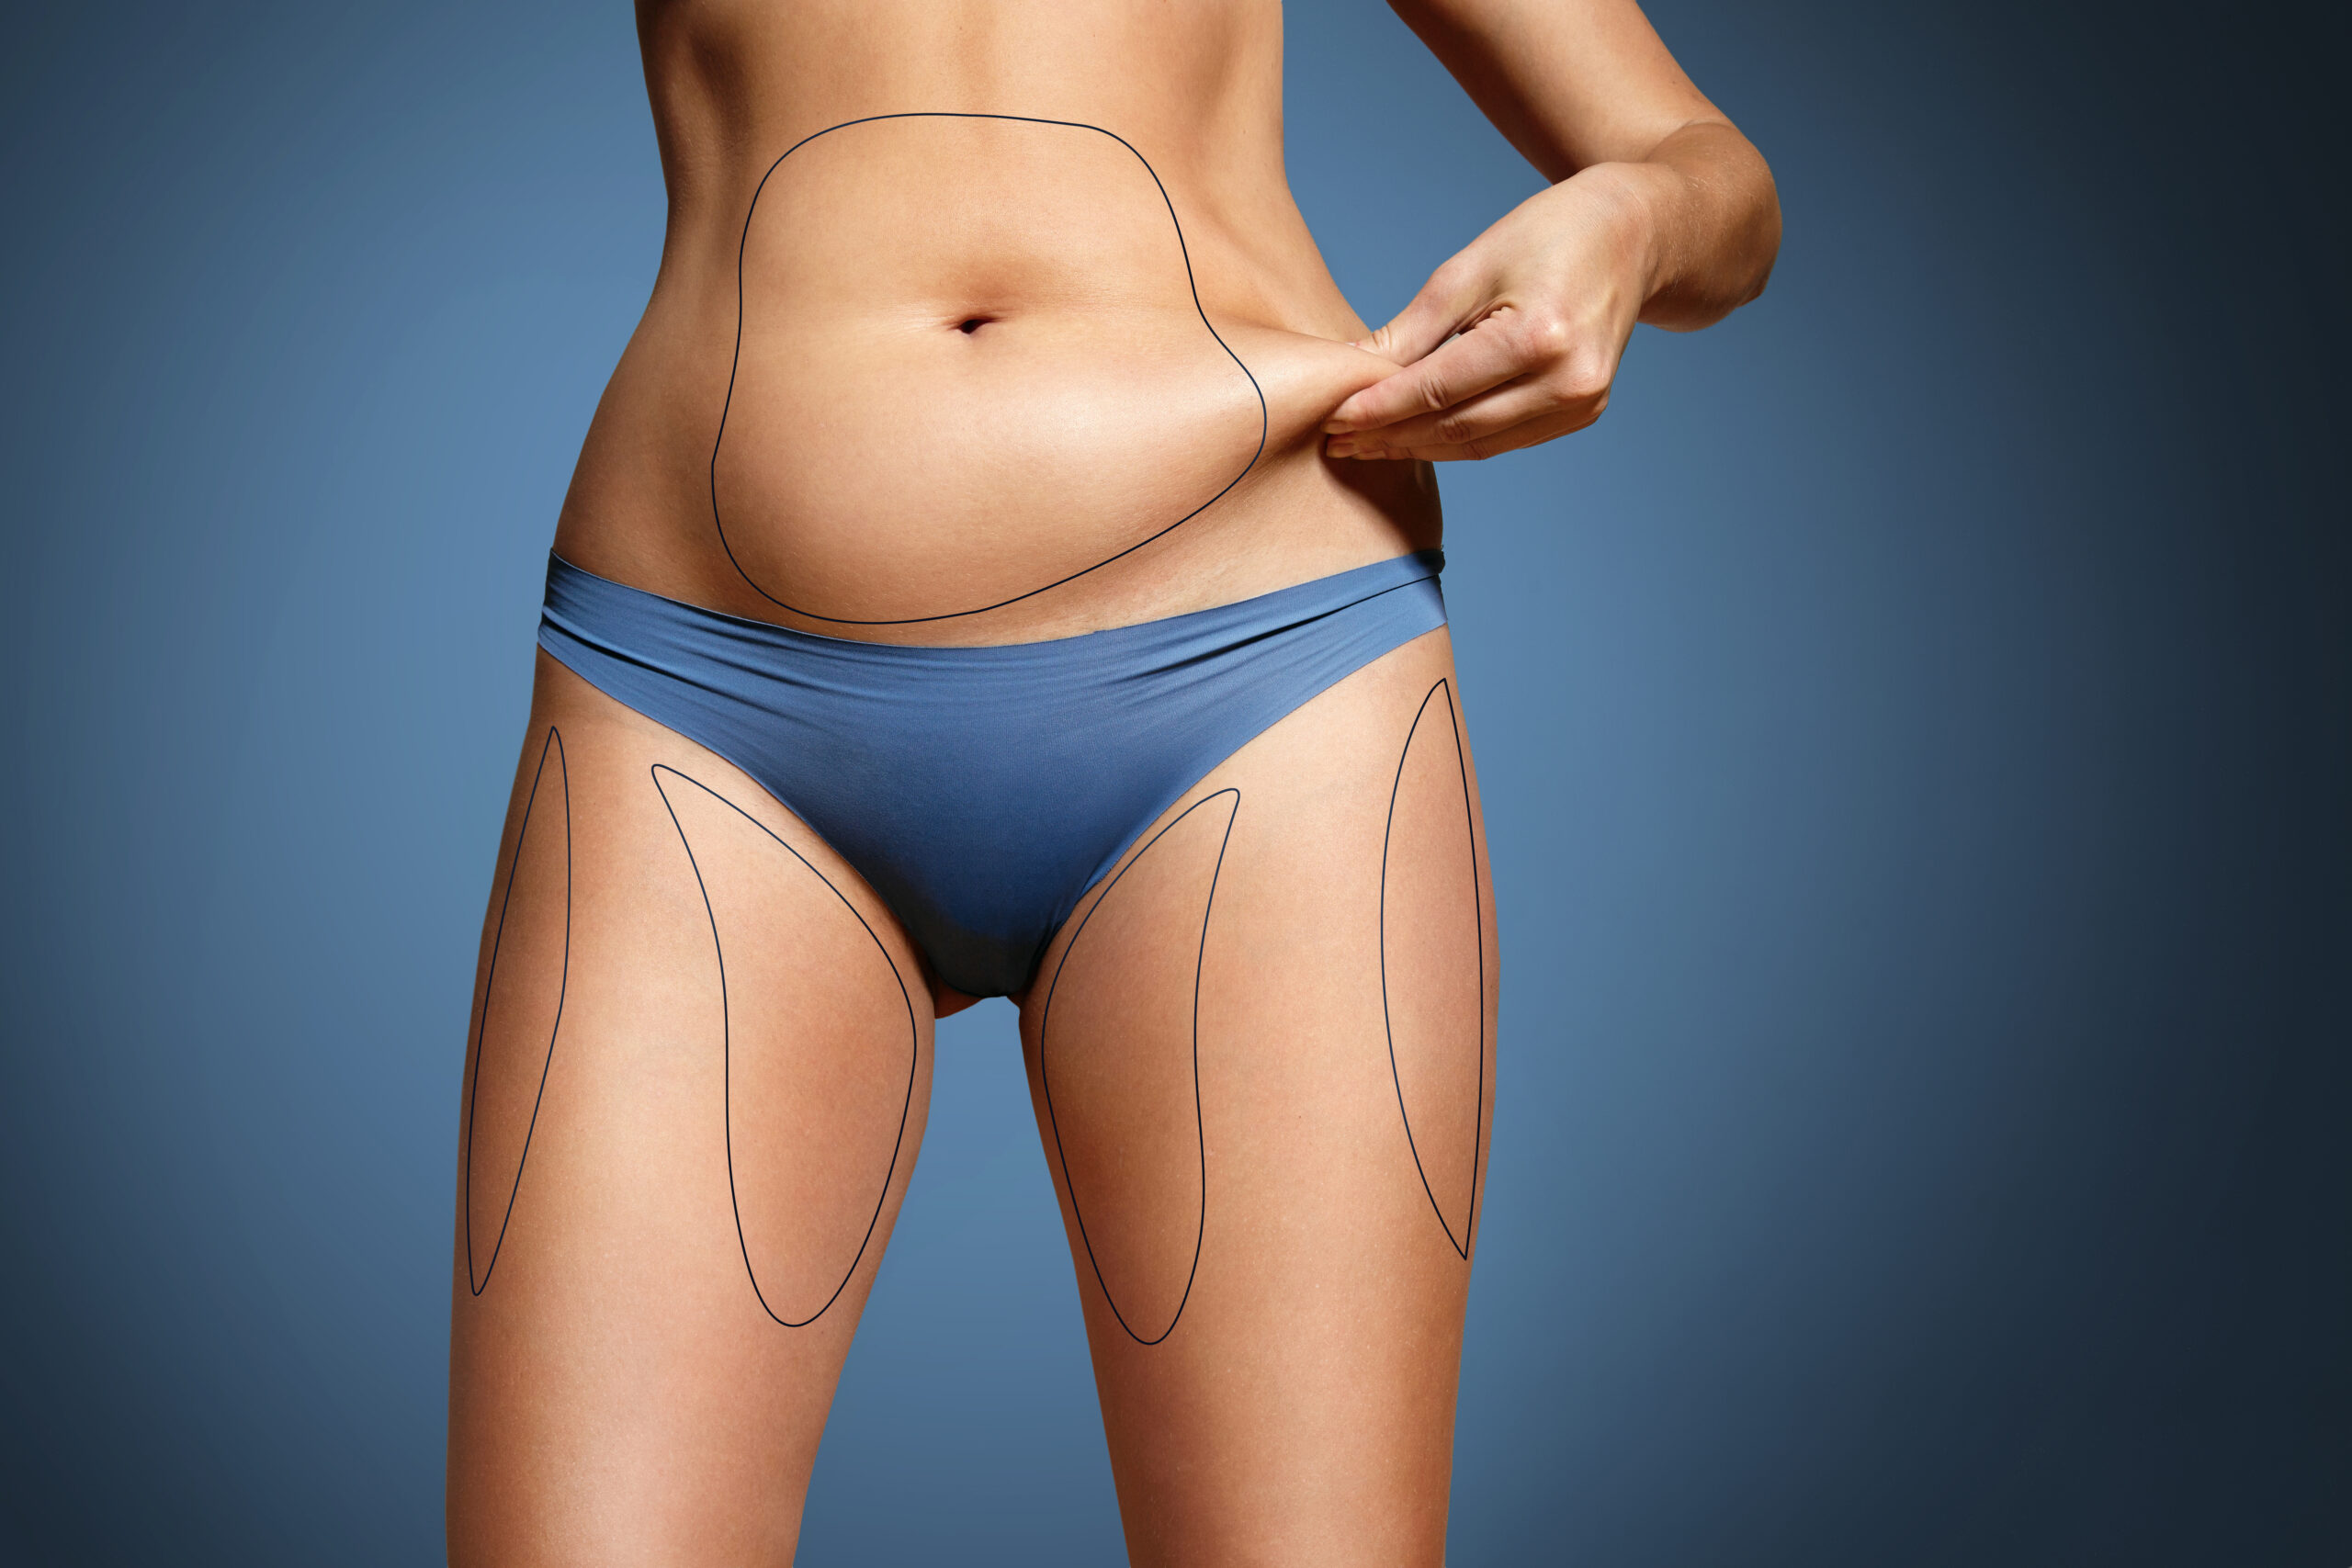 Liposuction Body Contouring: What You Need to Know, by HolisticHealer